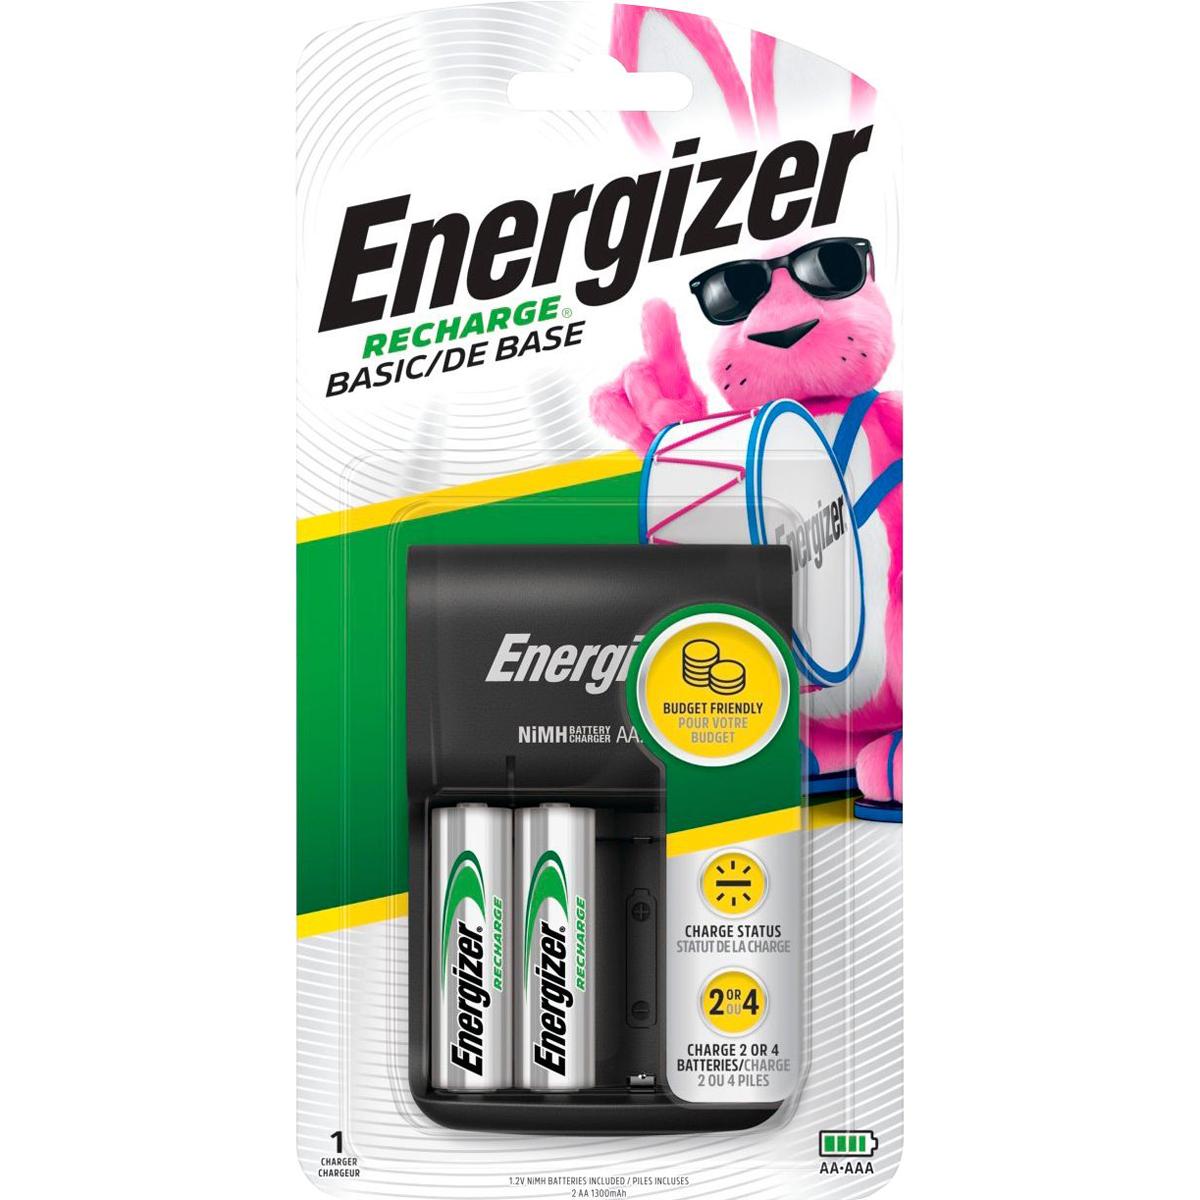 Energizer Recharge Basic Charger with 2 AA NiMH Batteries for $5.49